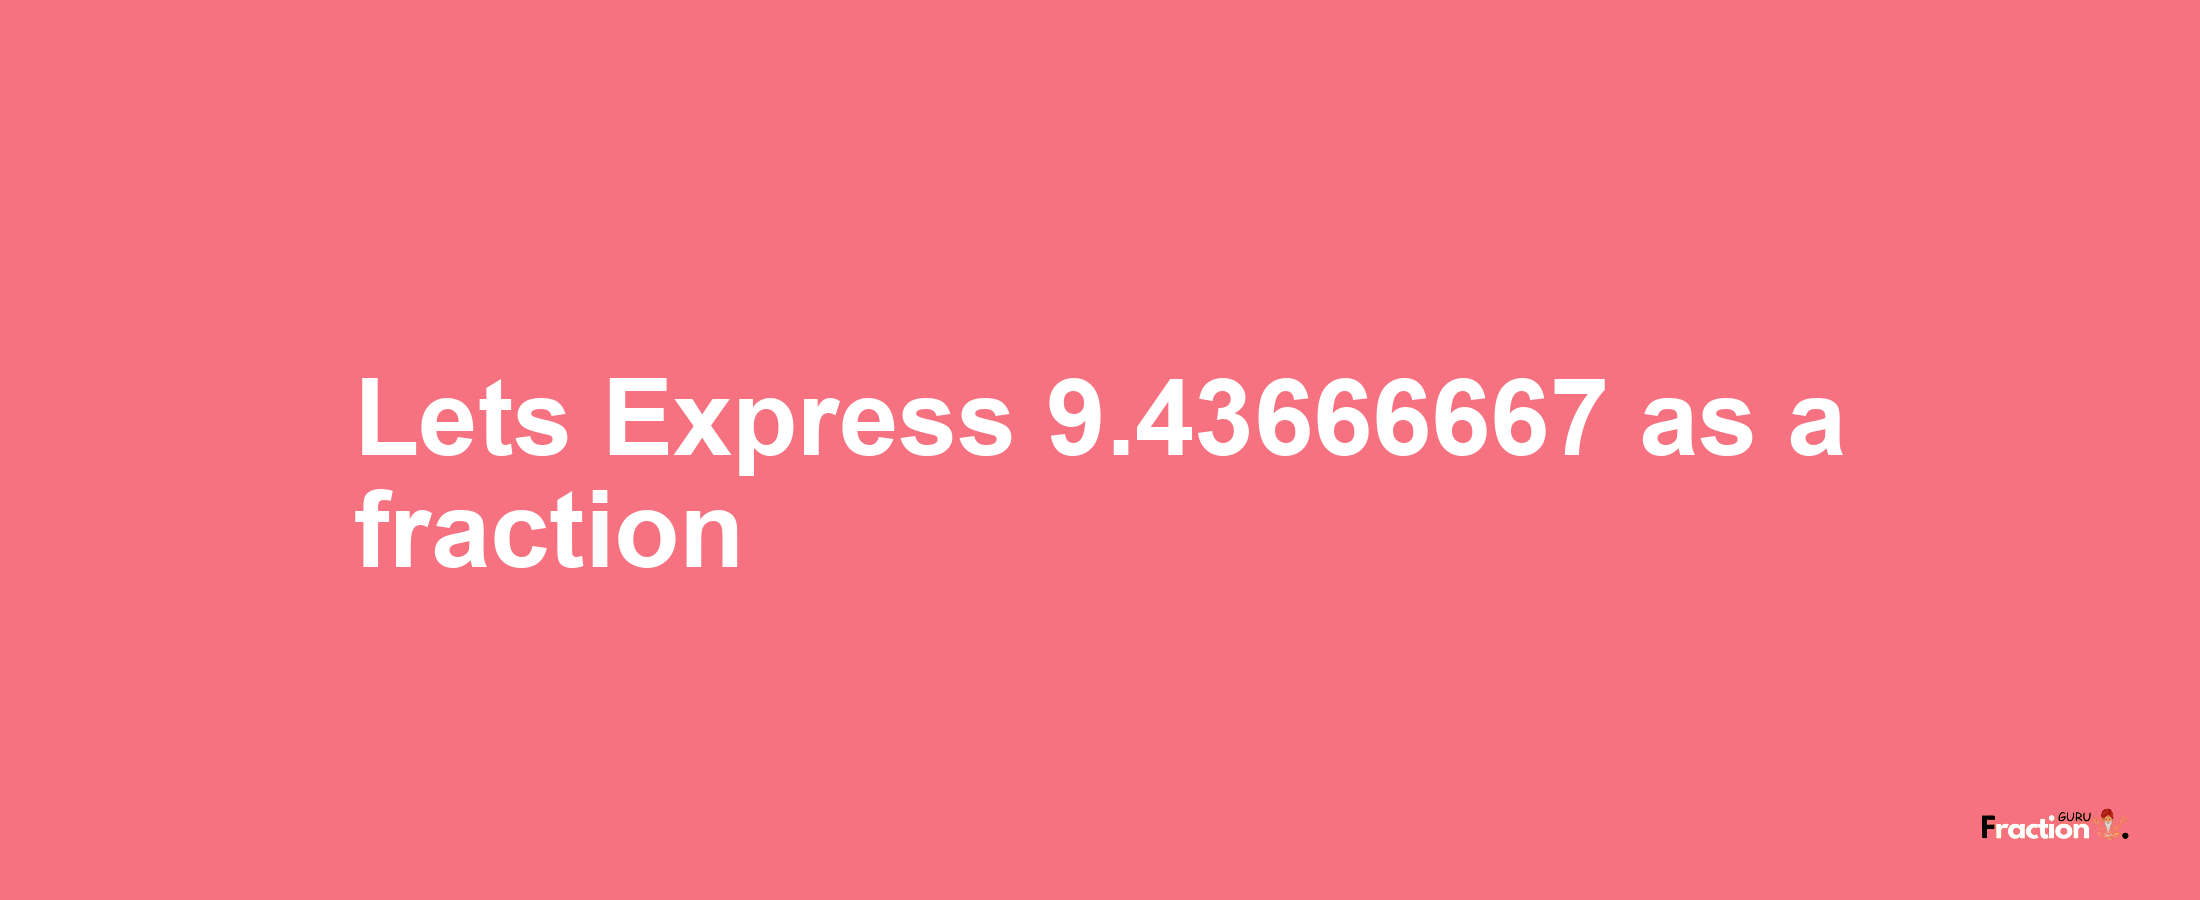 Lets Express 9.43666667 as afraction